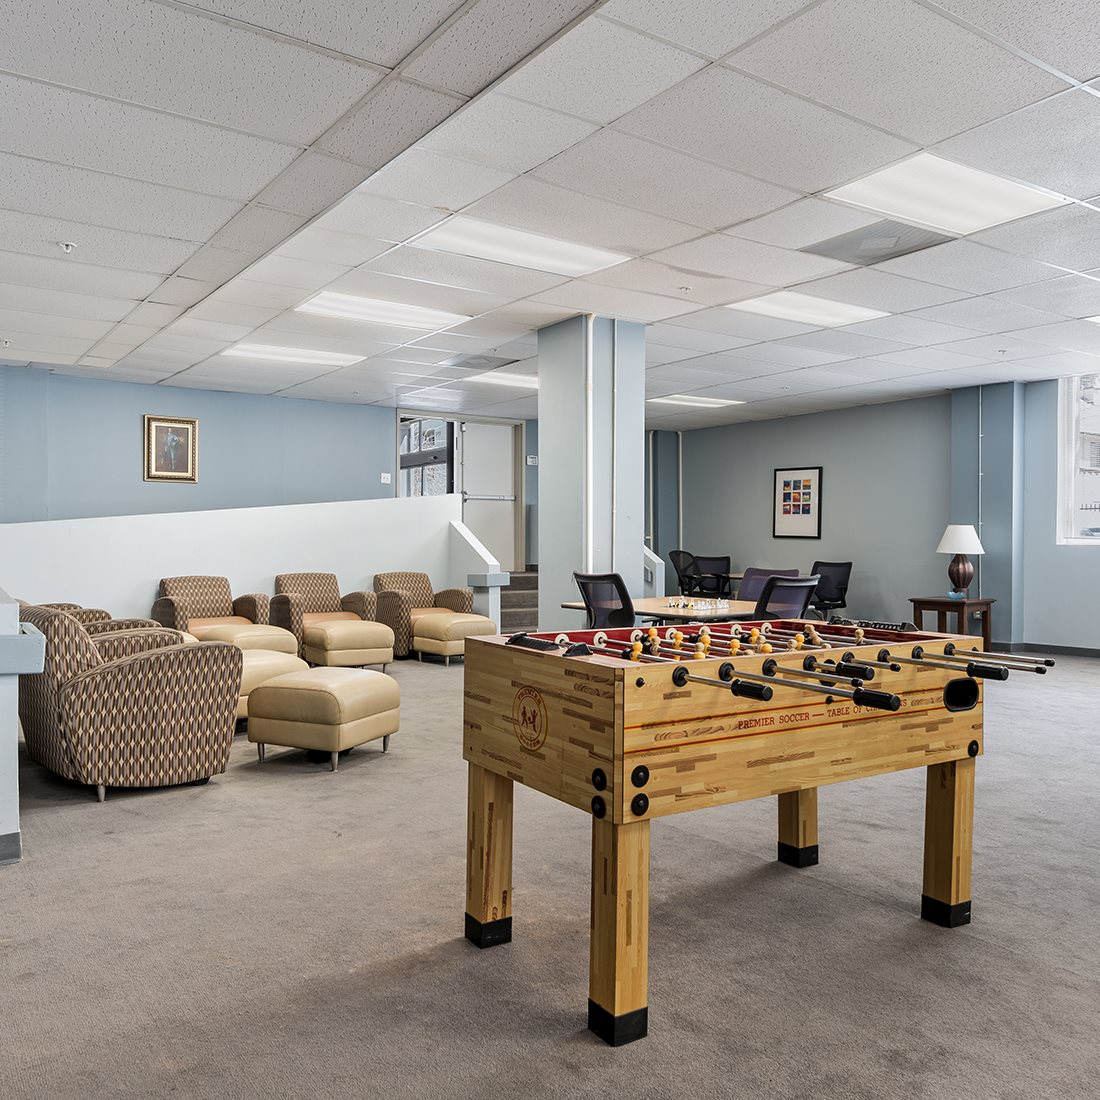 Community room with a foosball table, two round tables with chairs, and multiple sofa chairs. Room has stair and ramp access. Floor is carpeted.